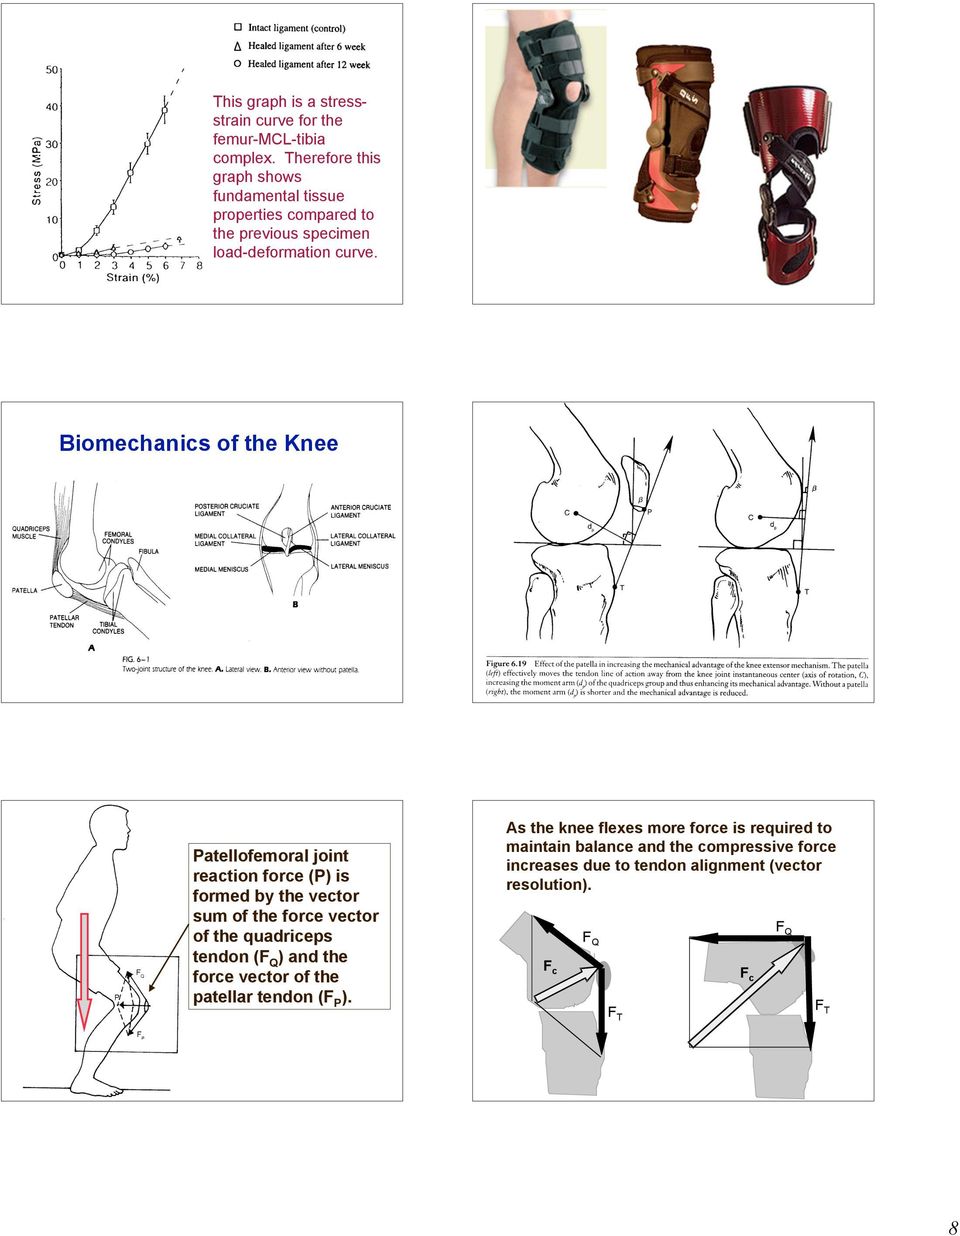 Biomechanics of the Knee Patellofemoral joint reaction force (P) is formed by the vector sum of the force vector of the quadriceps